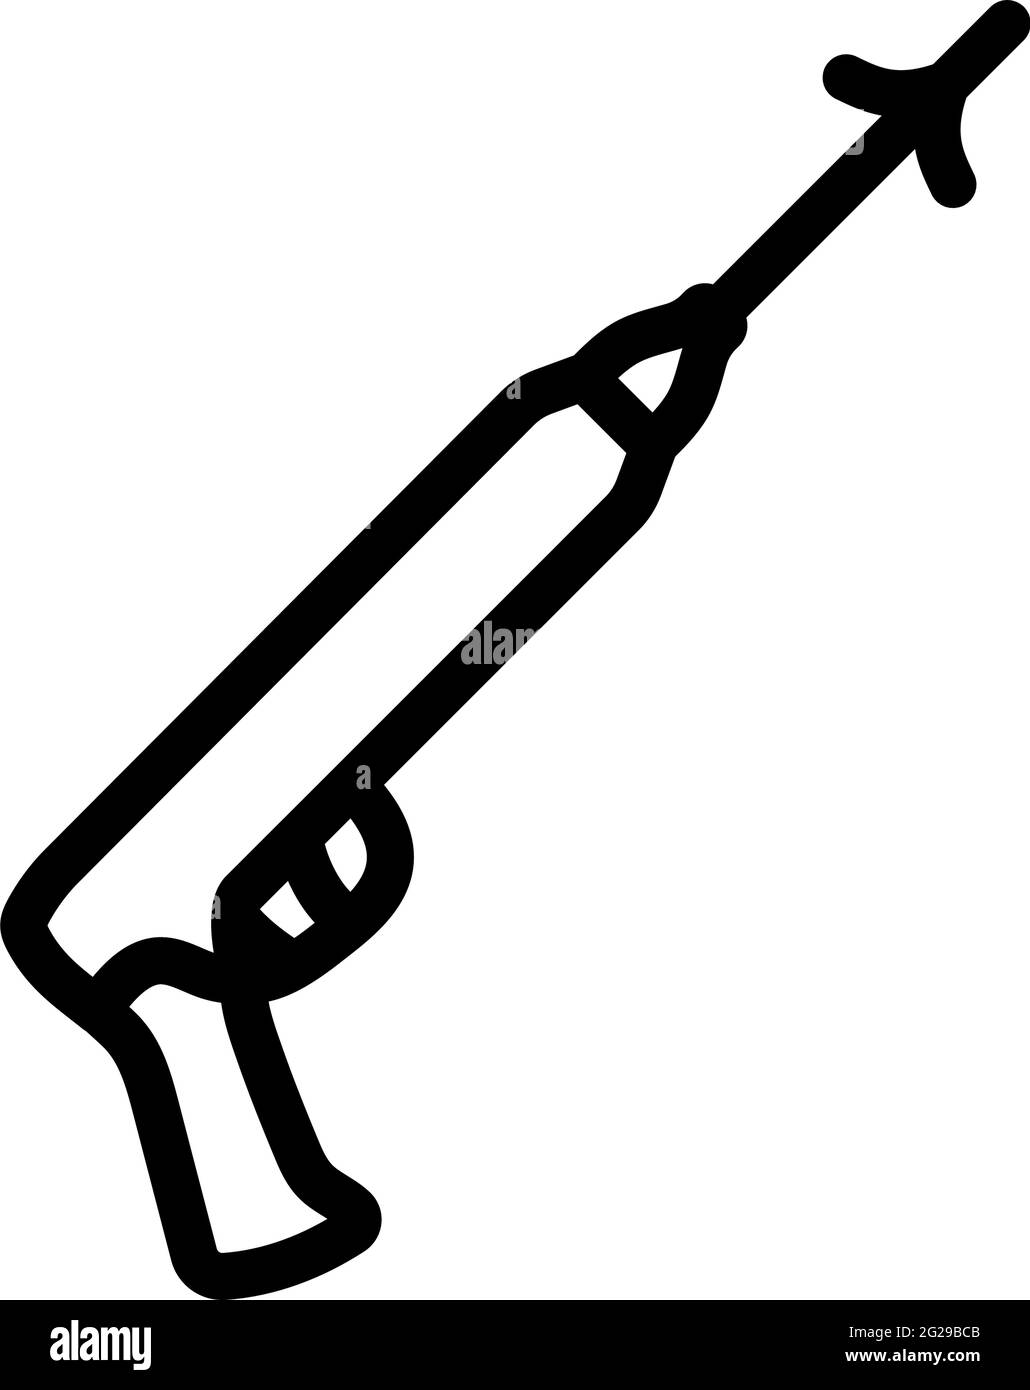 Premium Vector  Harpoon gun icon whale and fish hunt weapon isolated on  white background